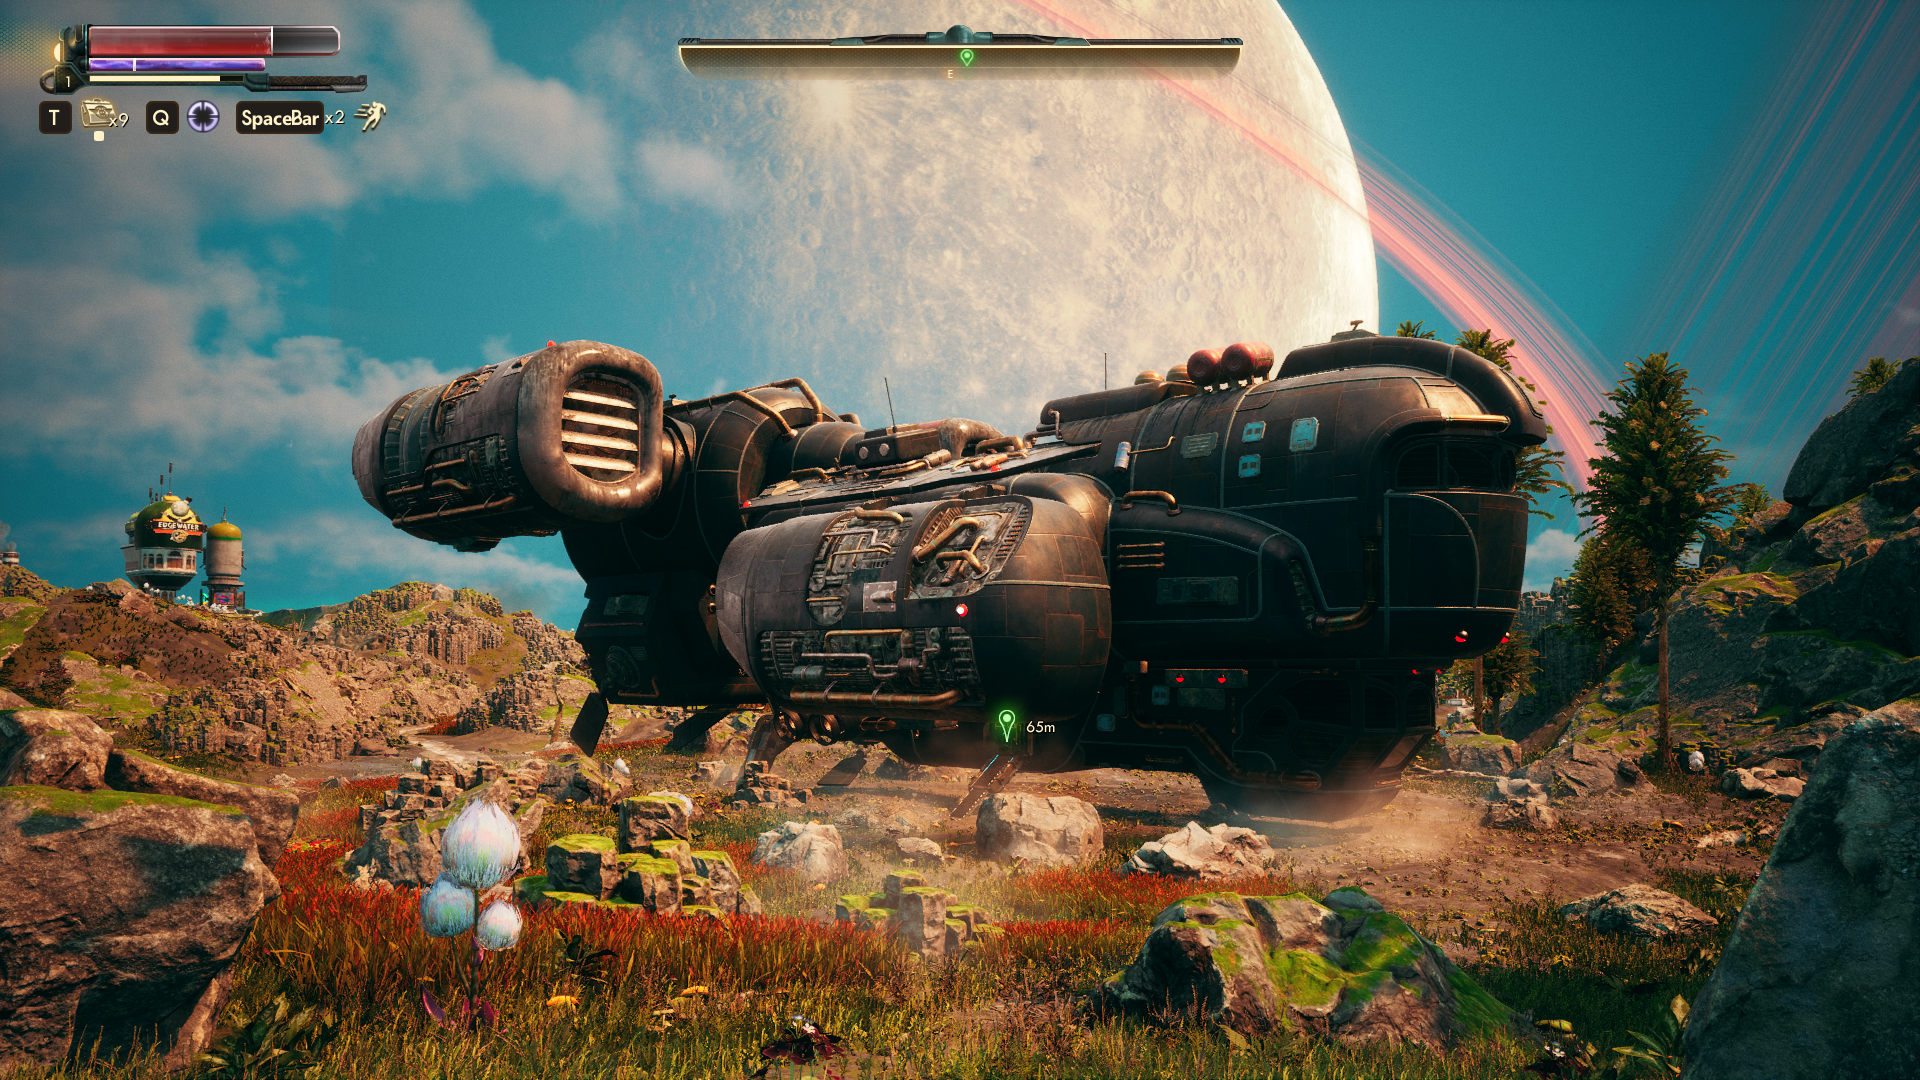 Your spaceship, the Unreliable, sits in a field in The Outer Worlds: Spacer’s Choice Edition.